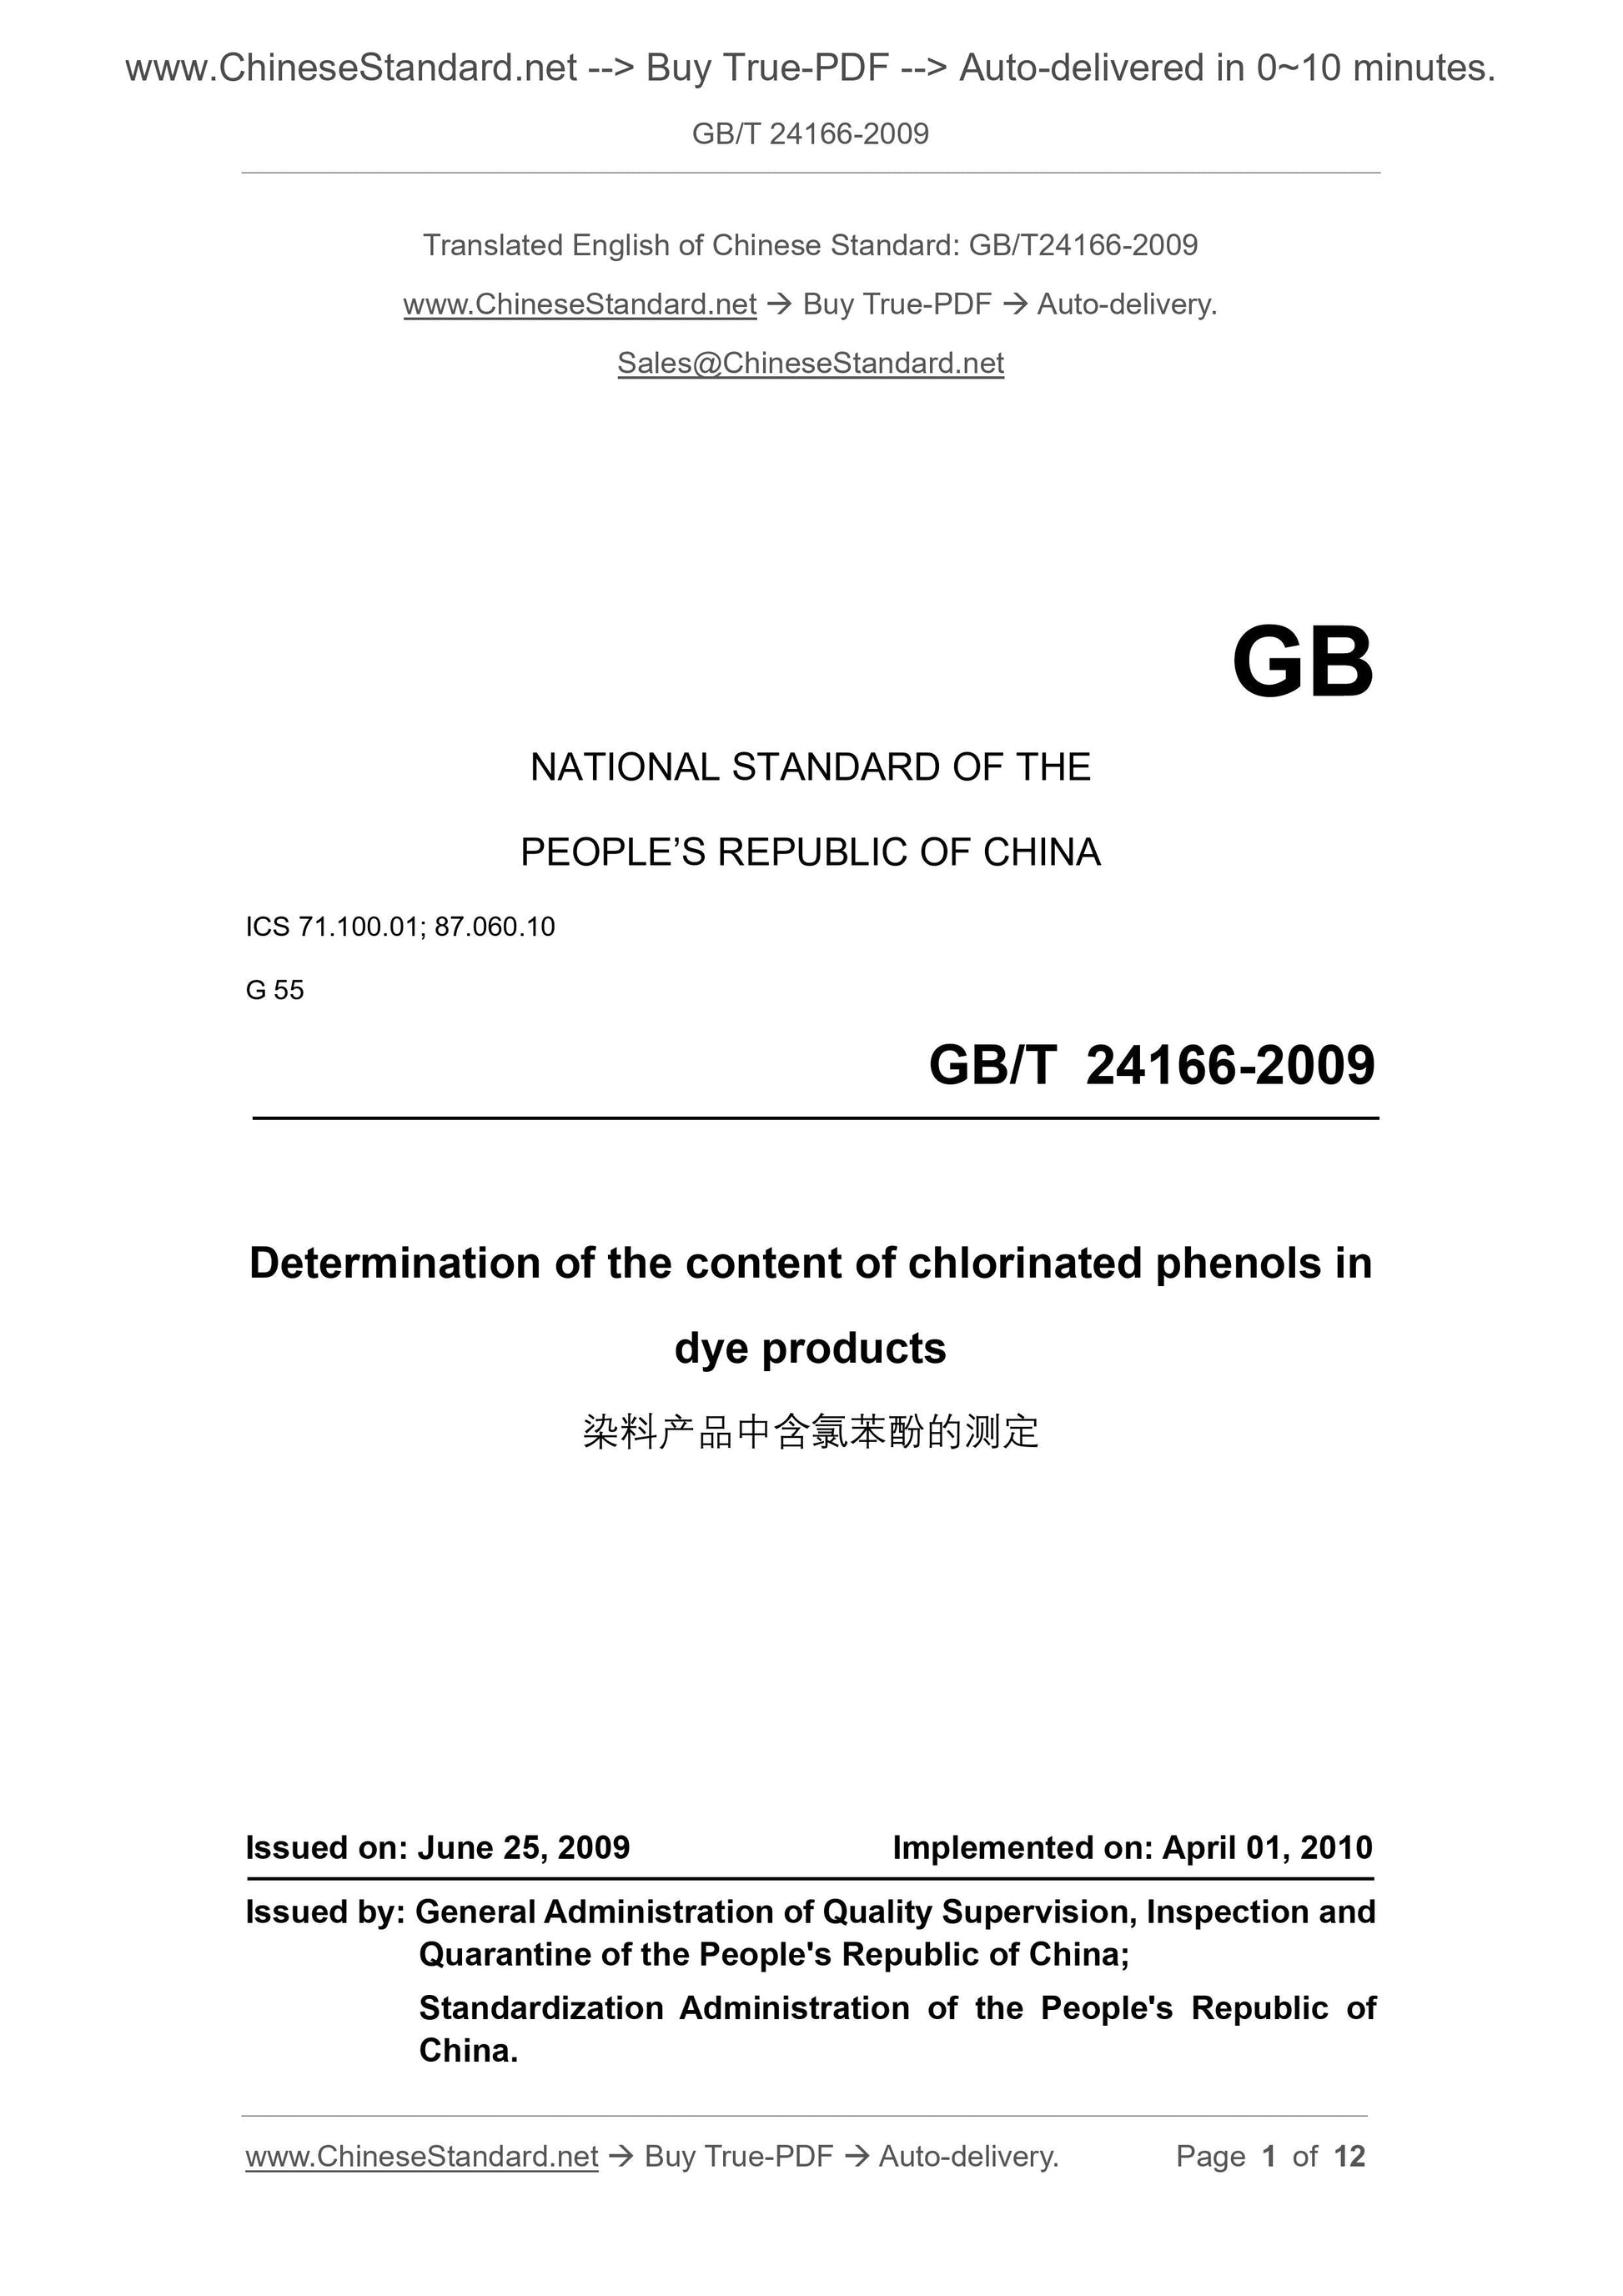 GB/T 24166-2009 Page 1